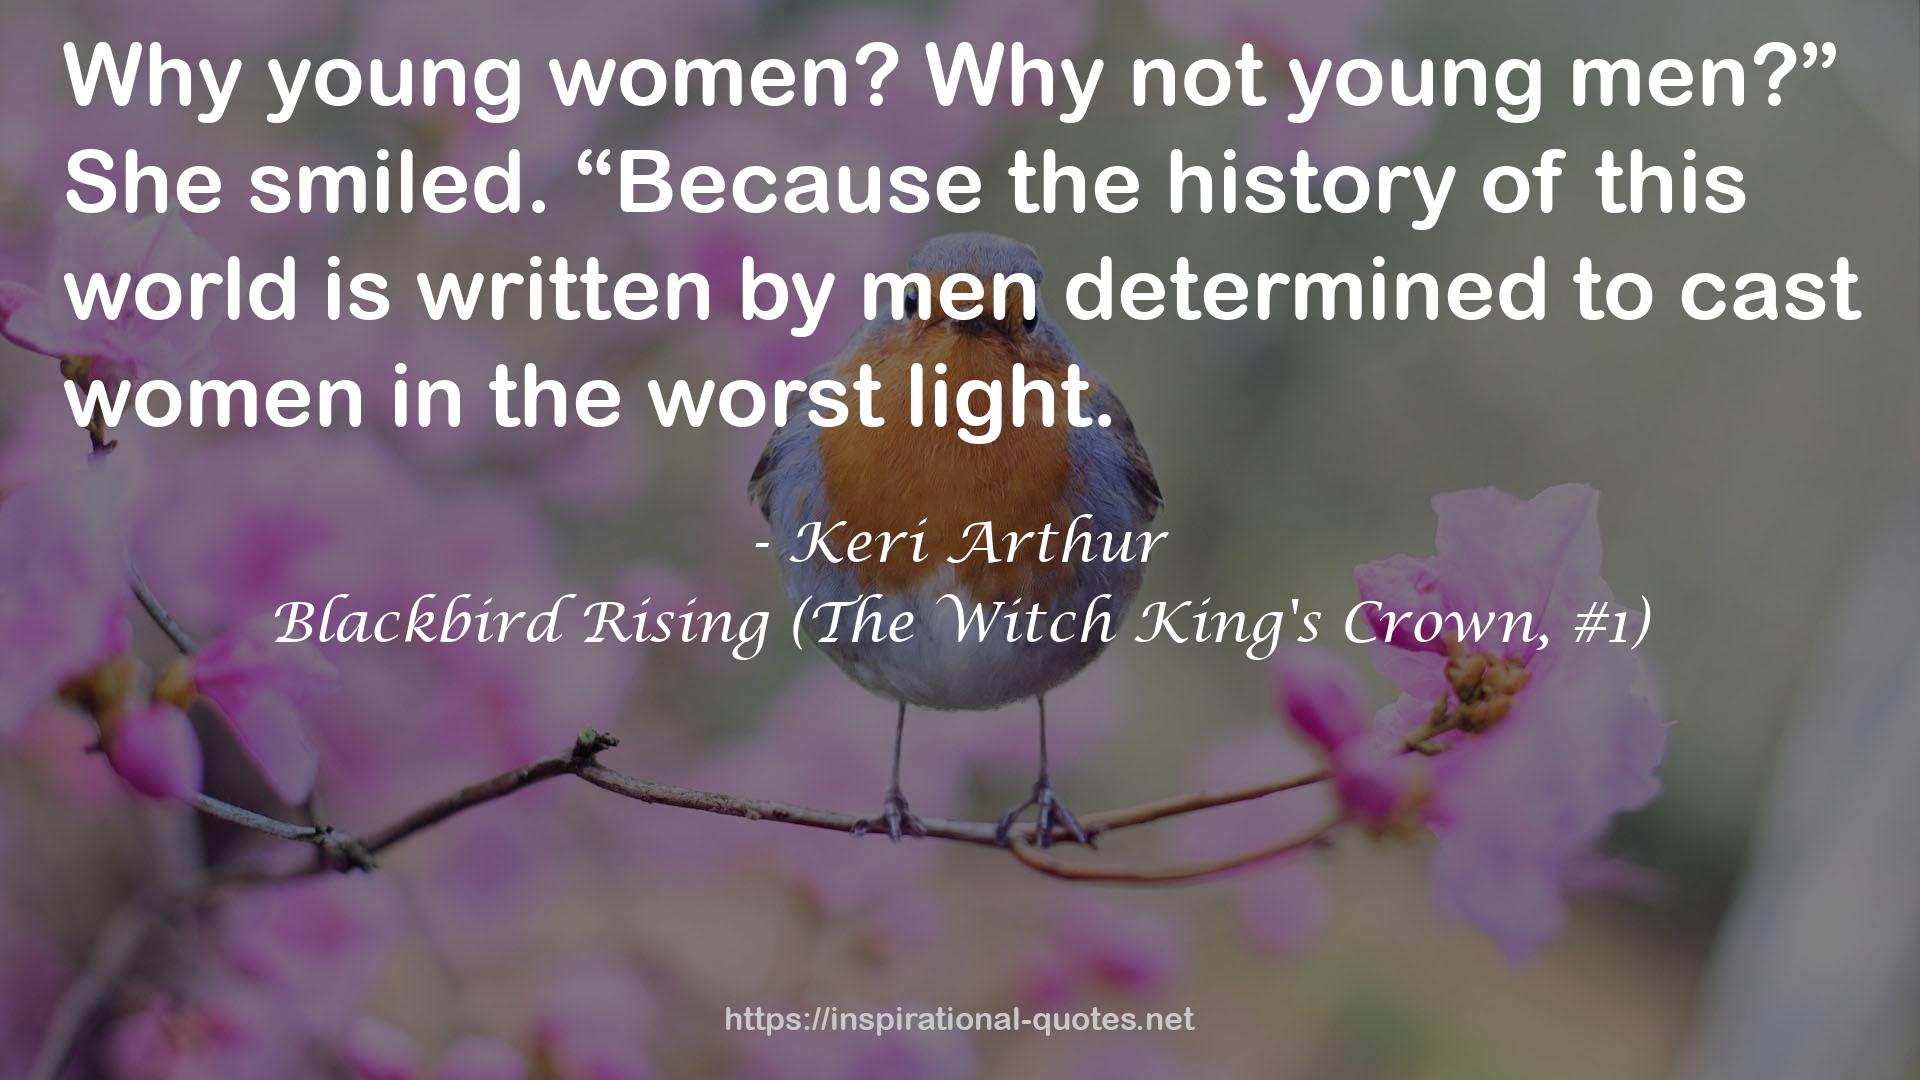 Blackbird Rising (The Witch King's Crown, #1) QUOTES